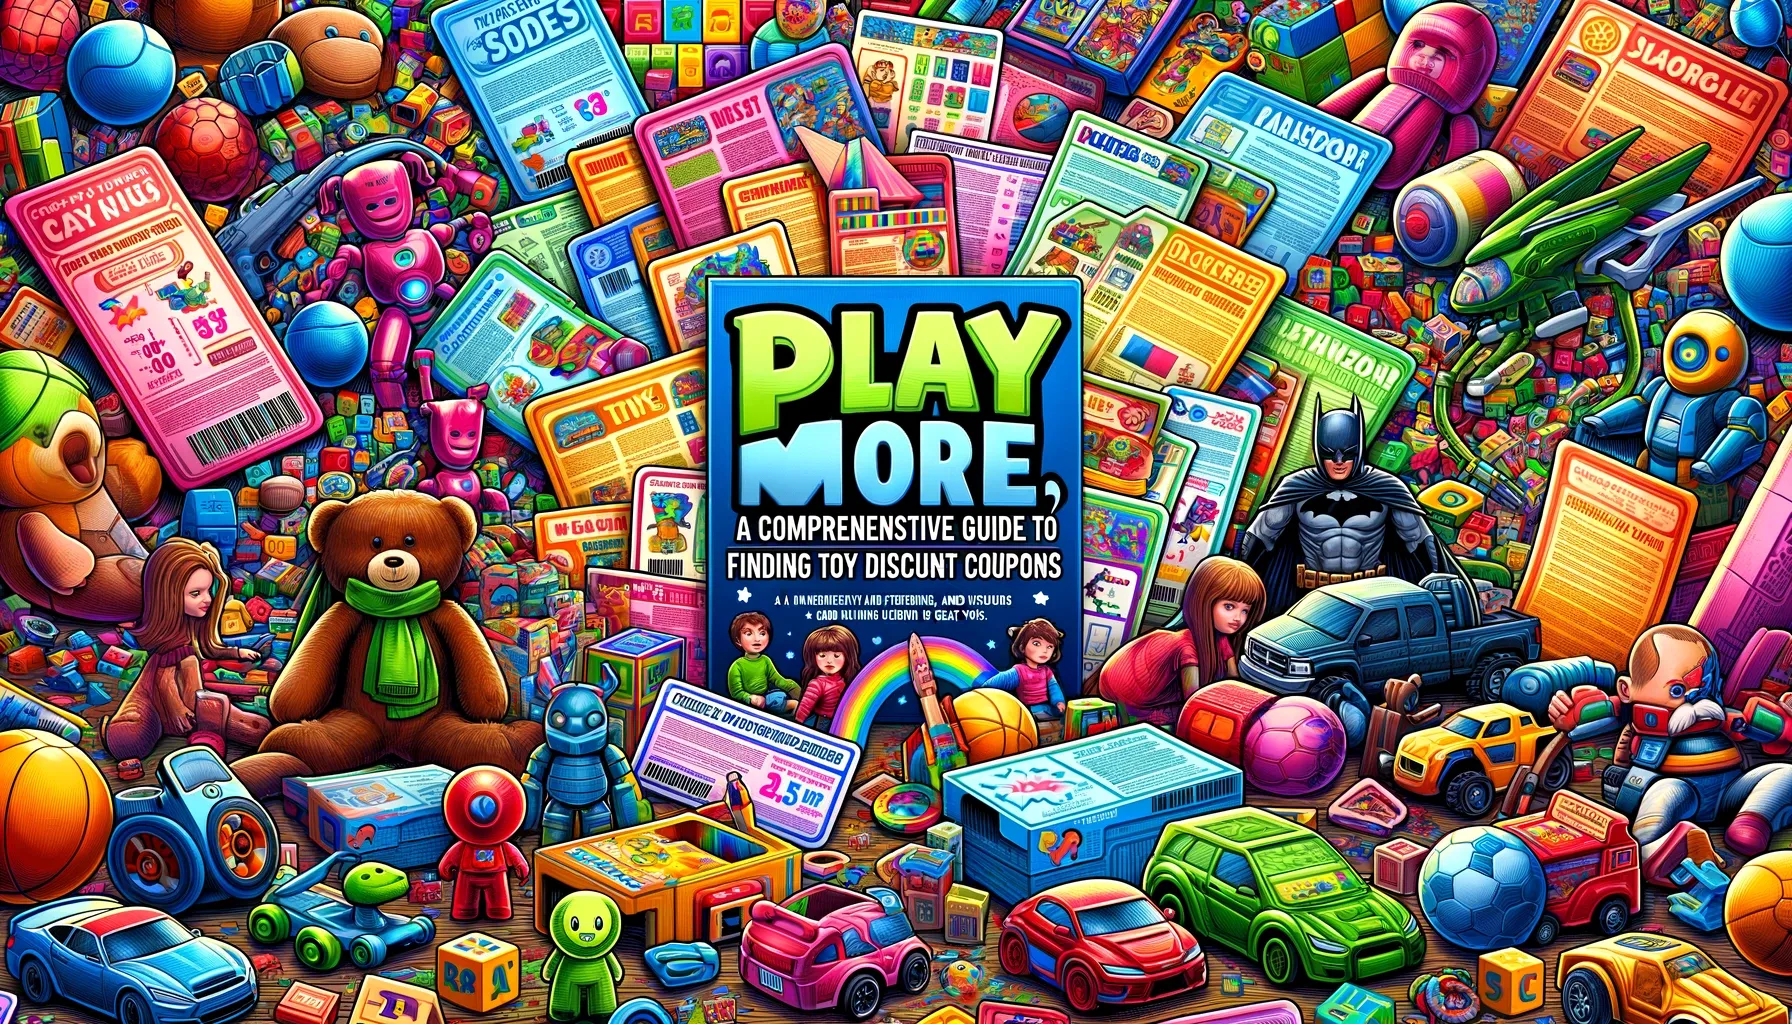 Play More, Pay Less: A Comprehensive Guide to Finding and Using Toy Discount Coupons